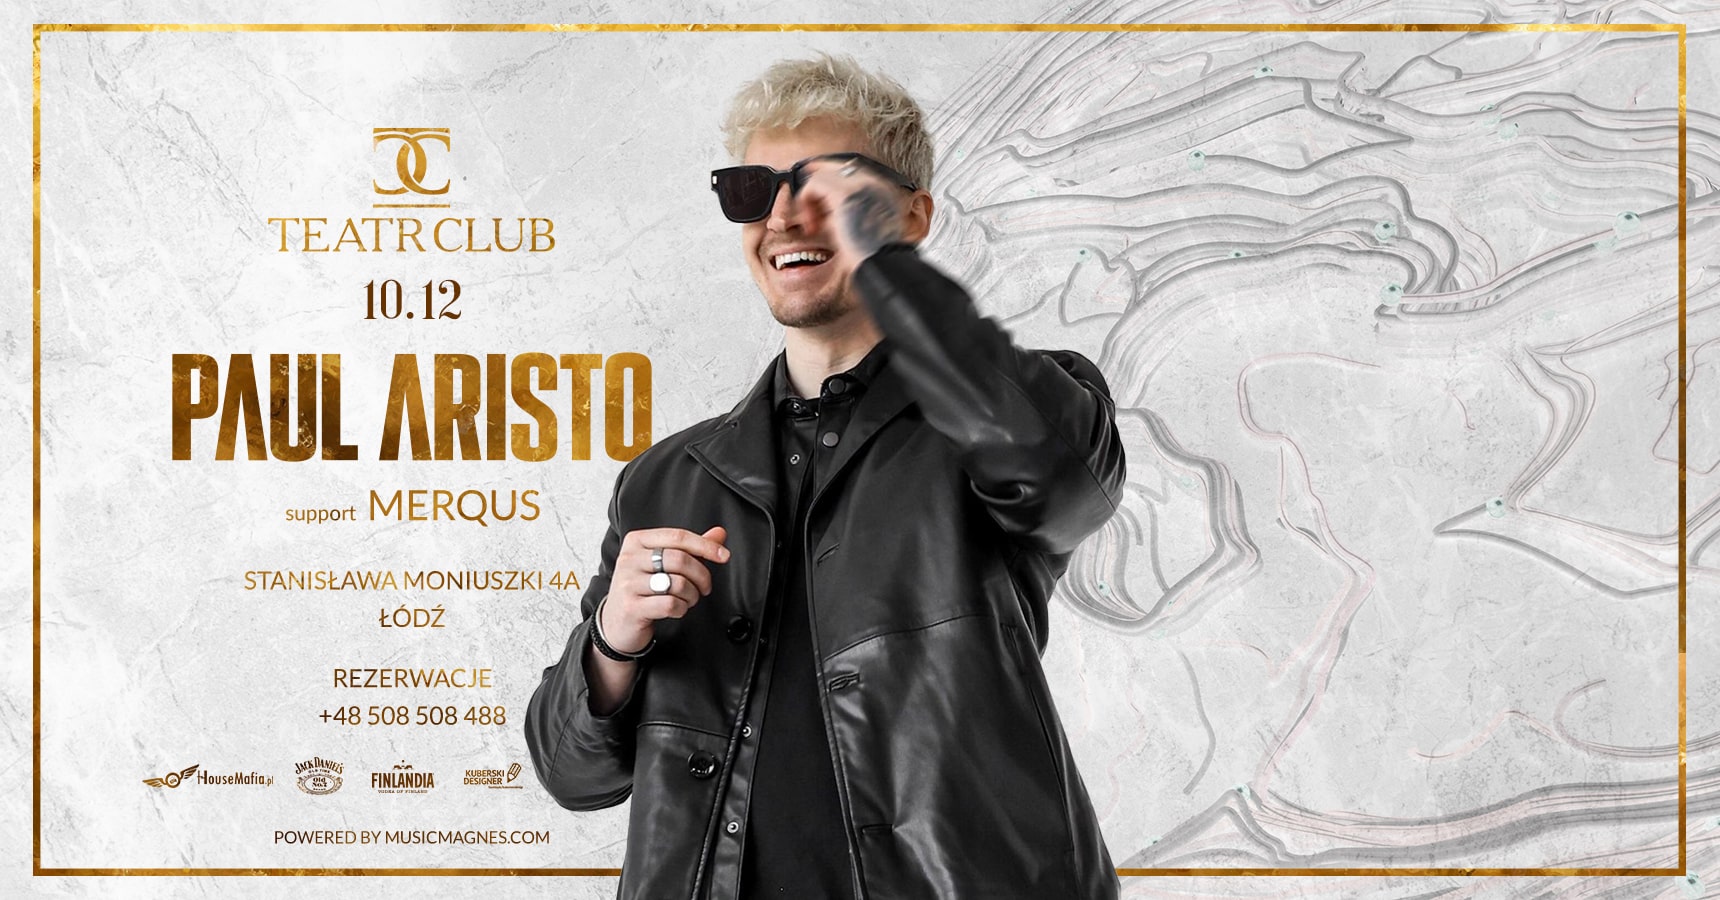 PAUL ARISTO | supported by deejay Merqus | Saturday 10.12